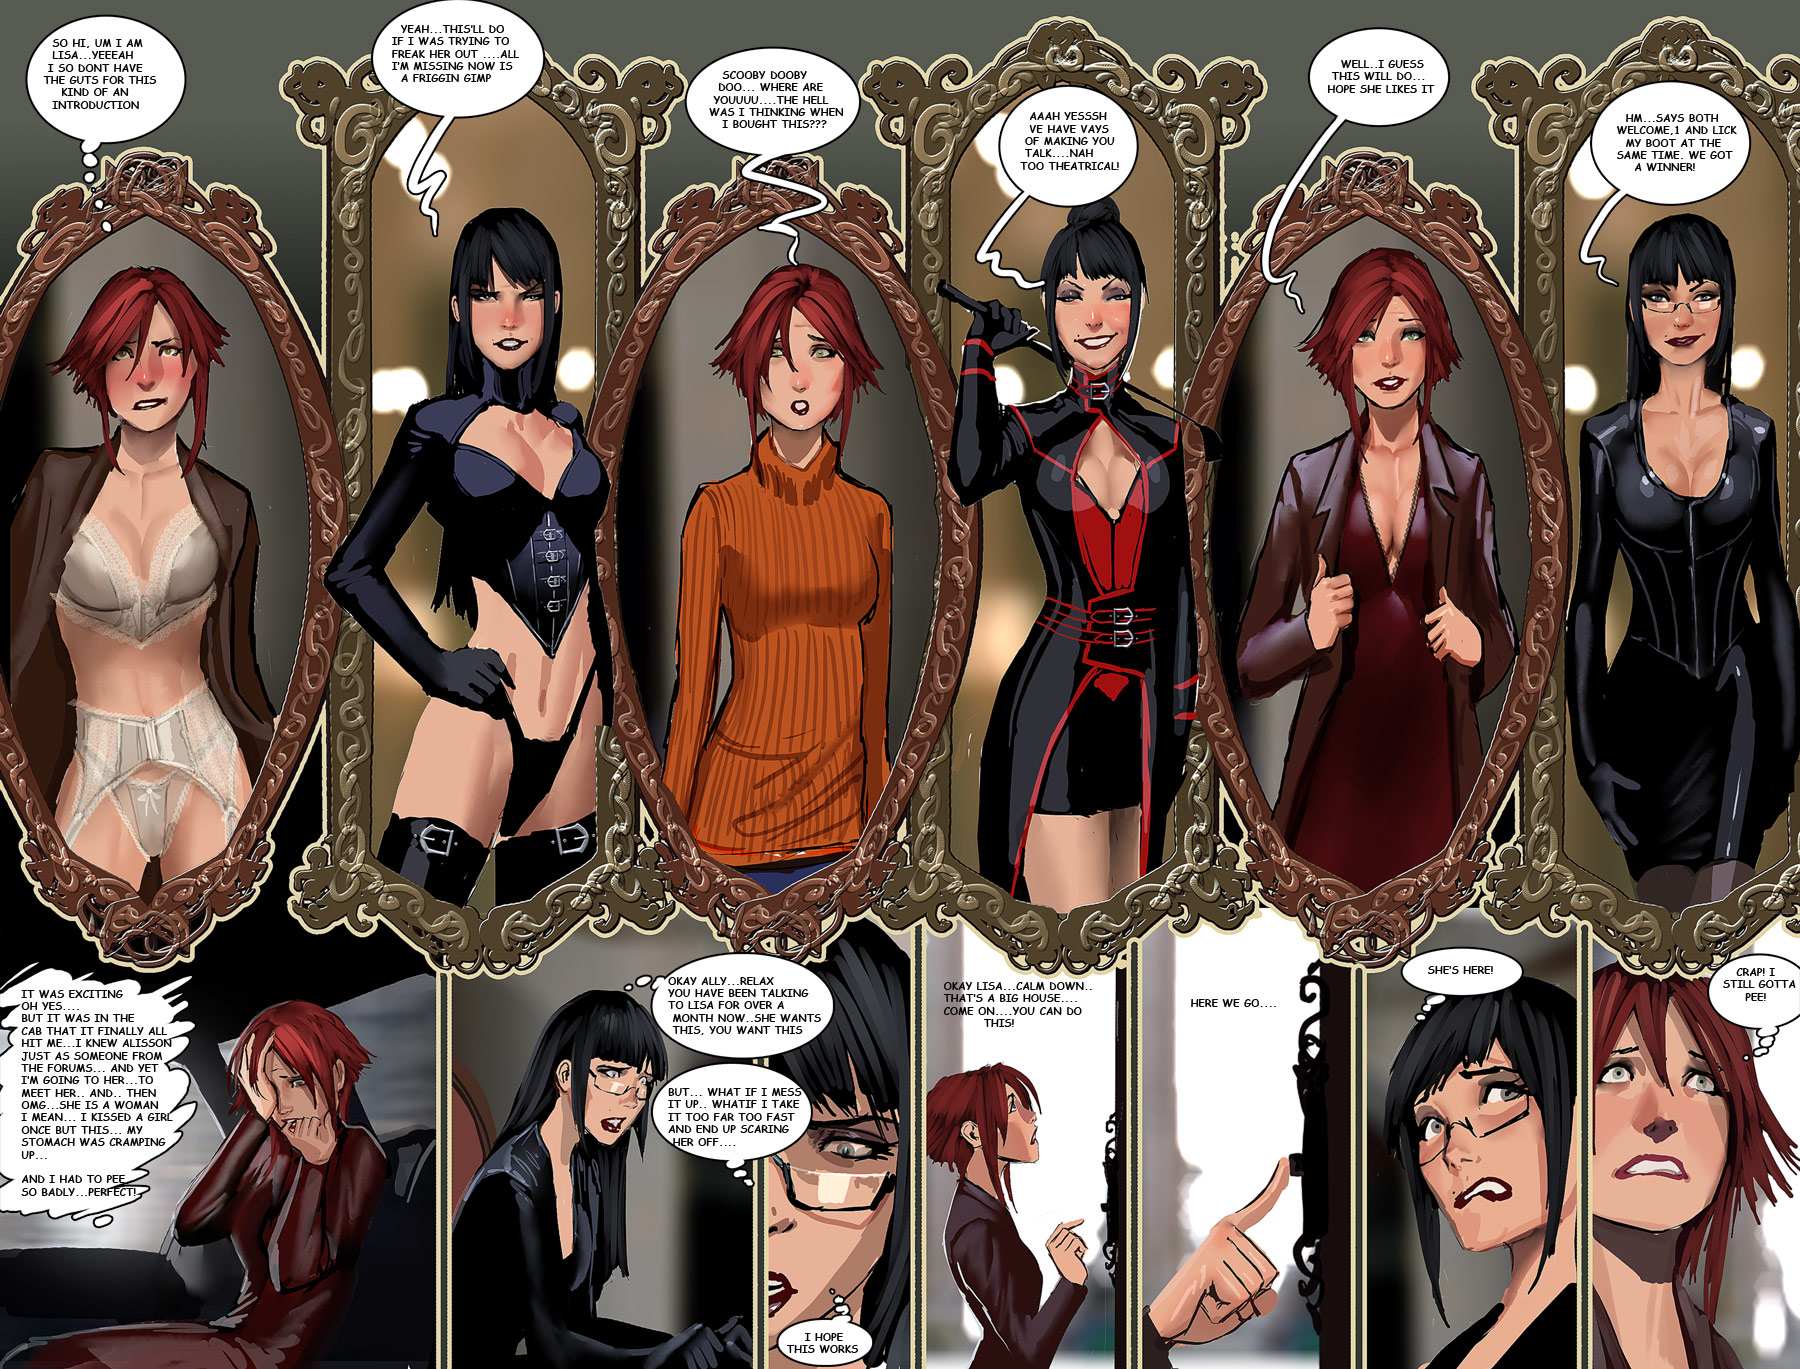 Sunstone: expect to see the graphic novel in print SOON